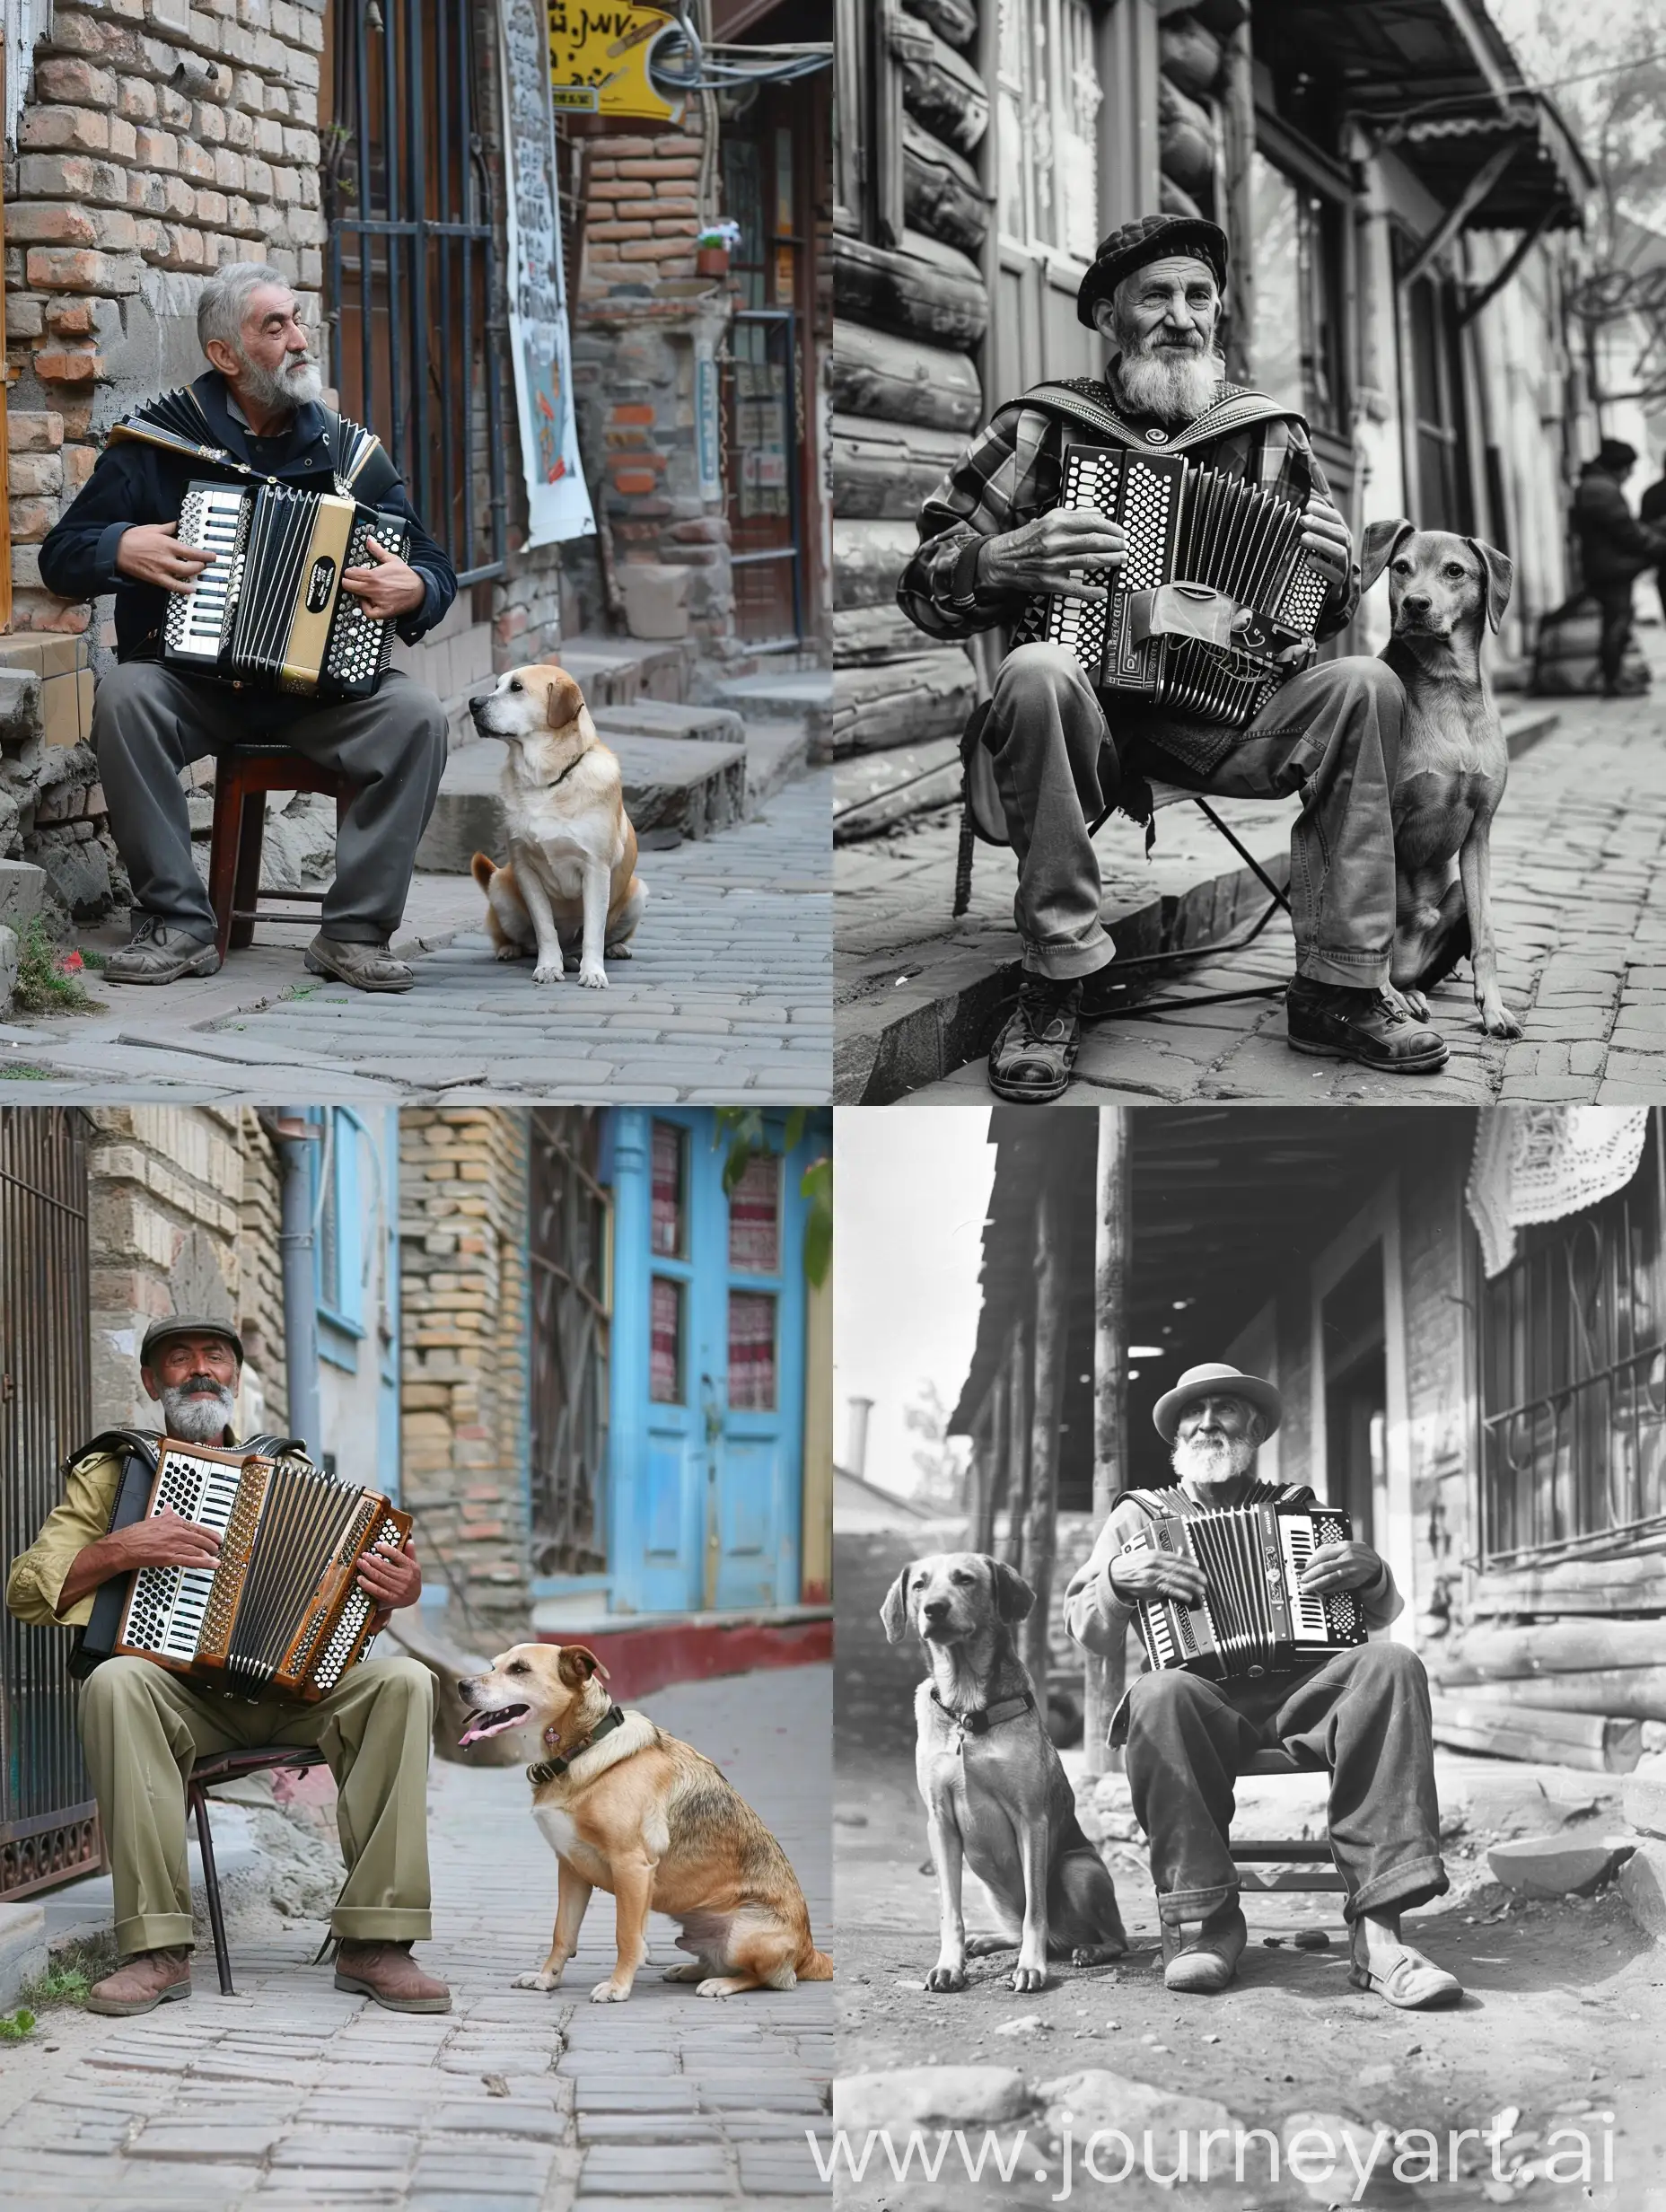 Street-Accordion-Player-Serenading-with-a-Companion-Dog